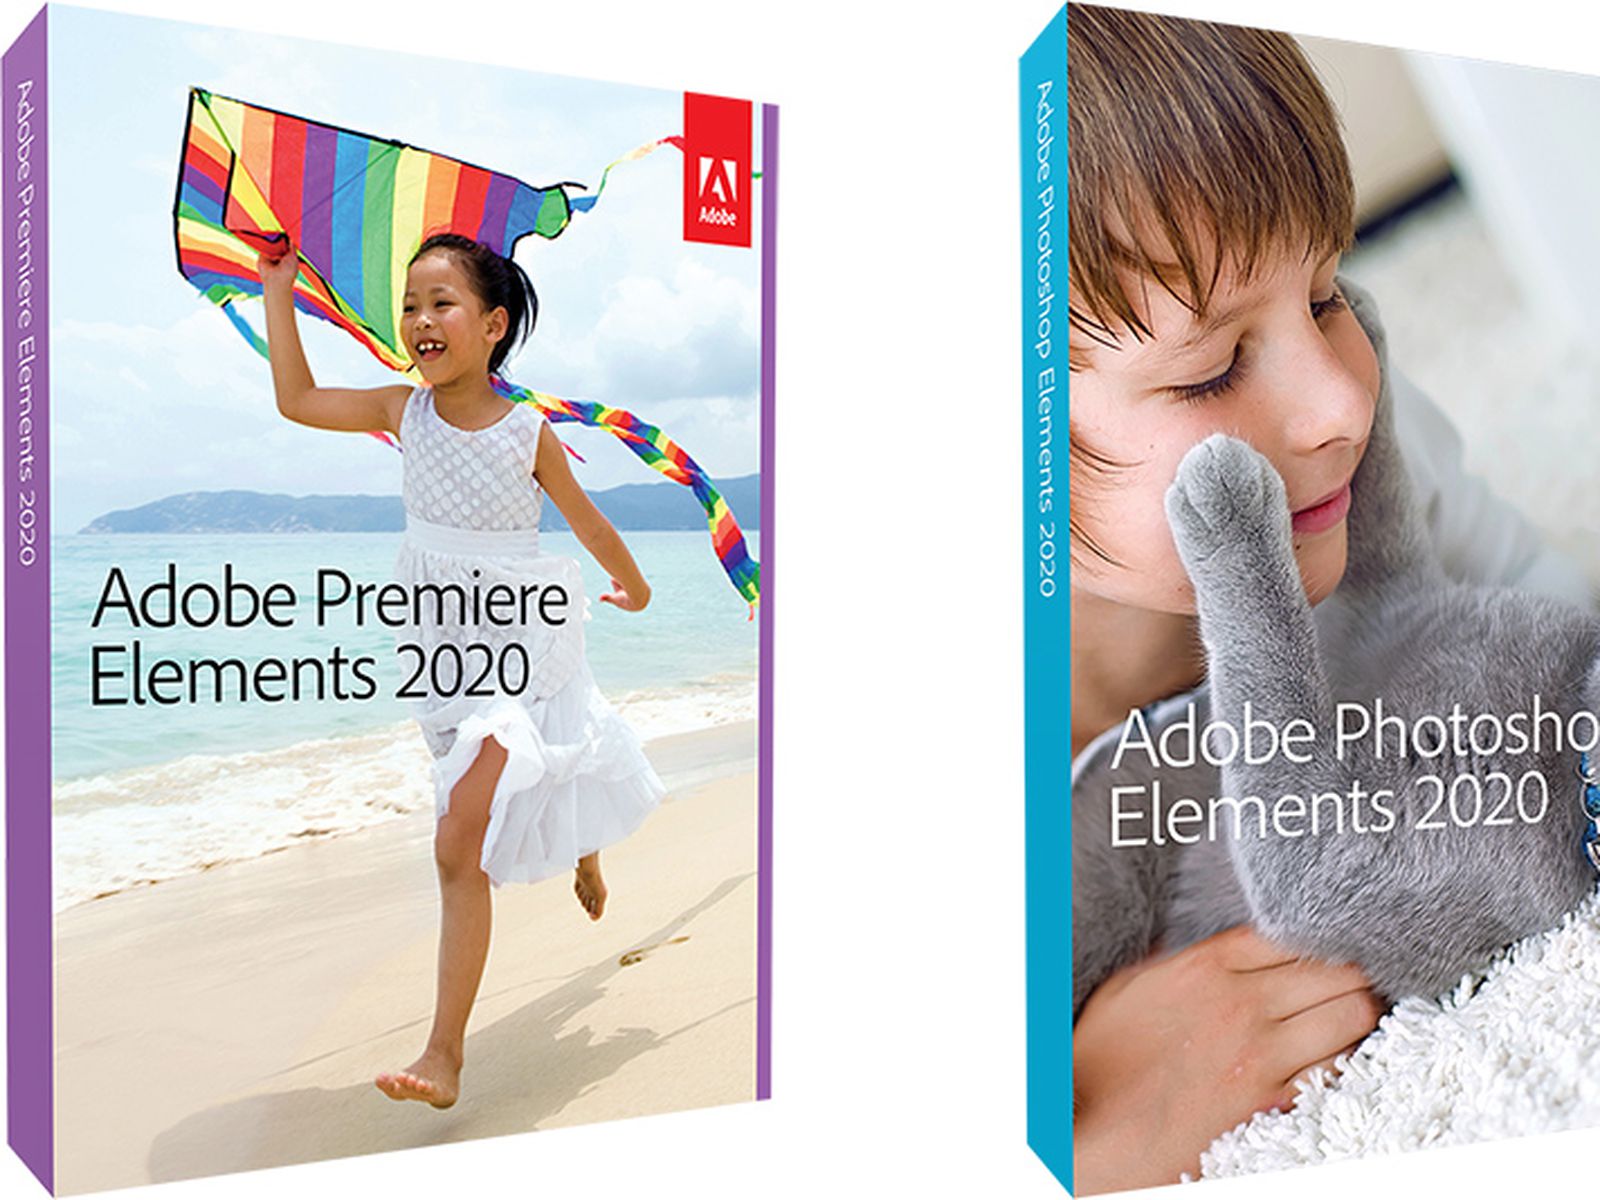 Adobe Launches Premiere and Photoshop Elements 2020 - MacRumors